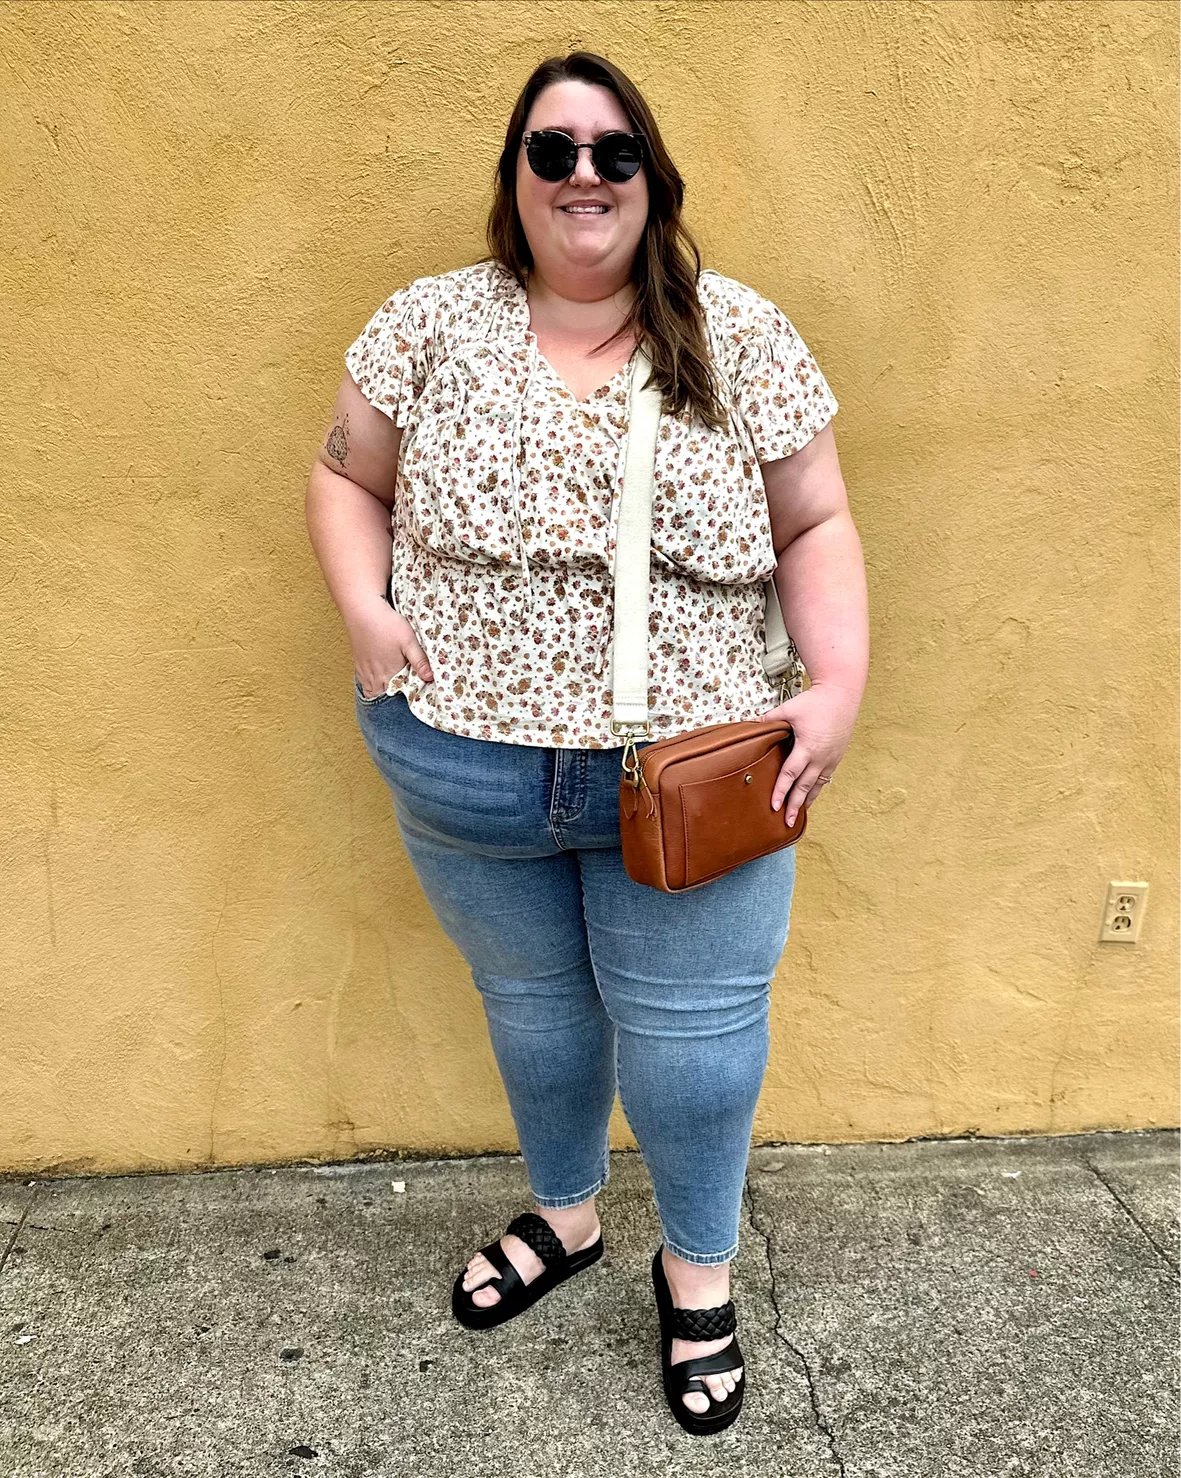 27 Stylish Plus Size Outfits to Wear This Summer